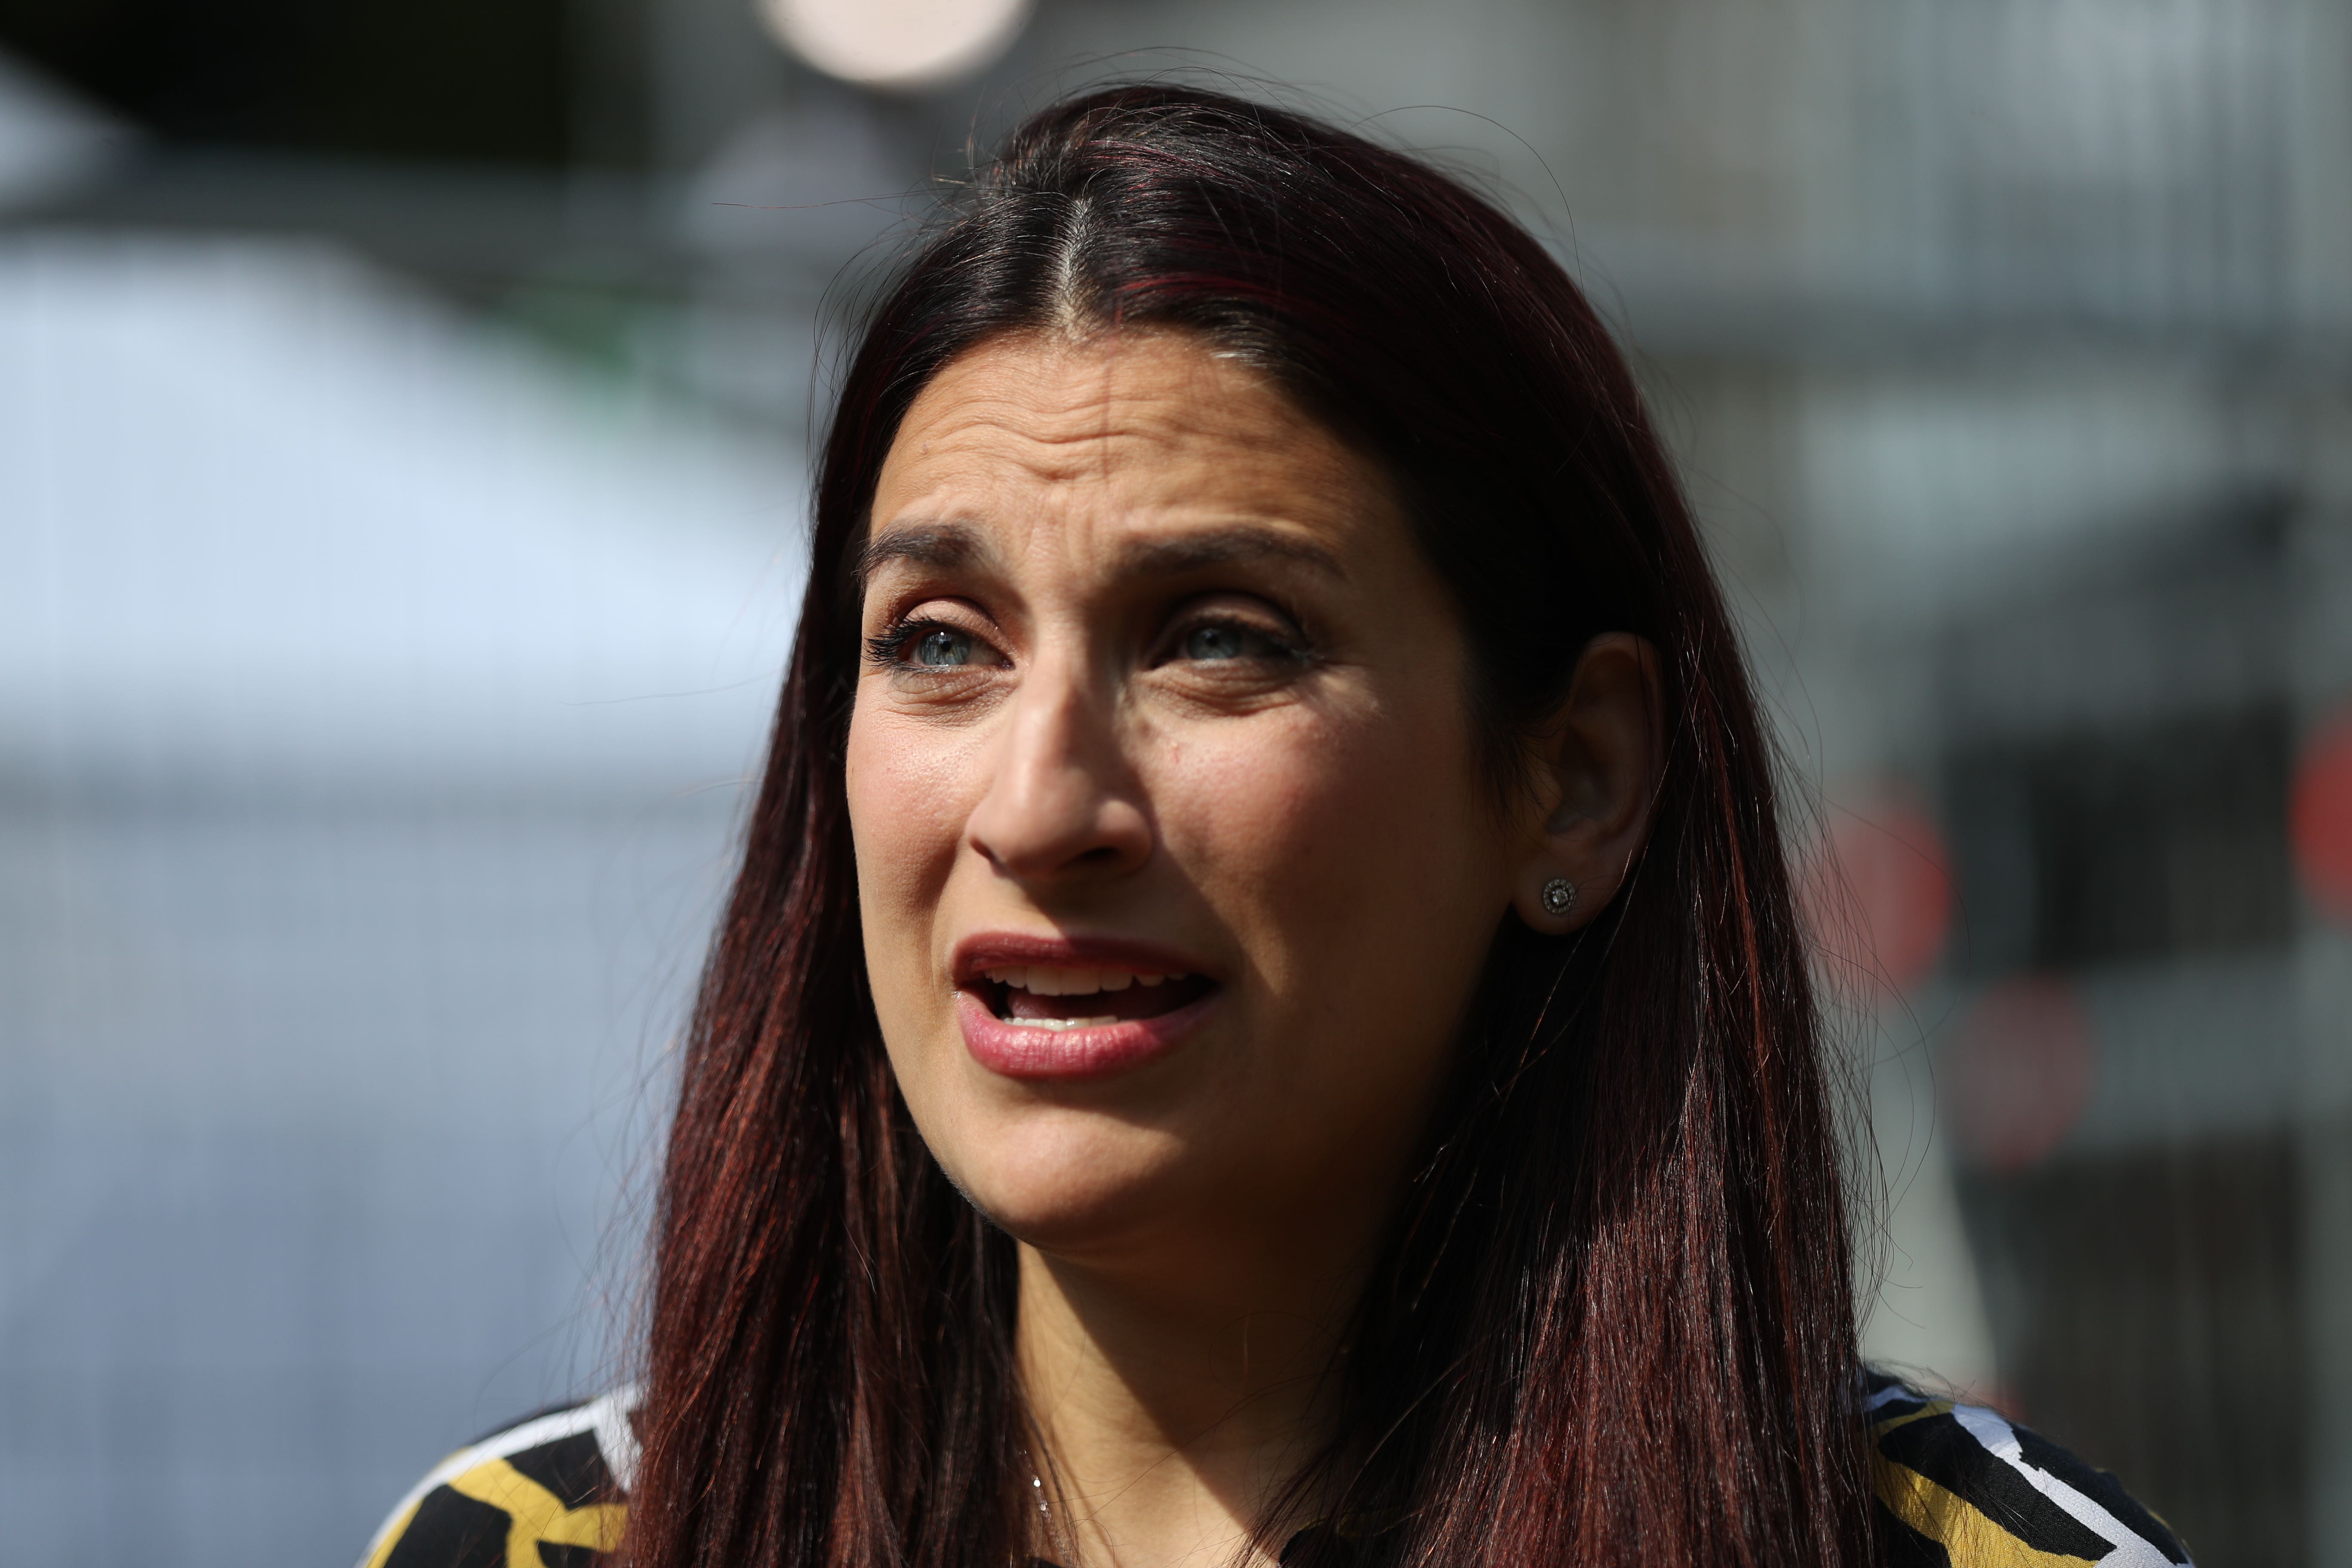 Luciana Berger rejoined Labour in February this year after quitting due to concerns about anti semitism under Jeremy Corbyn